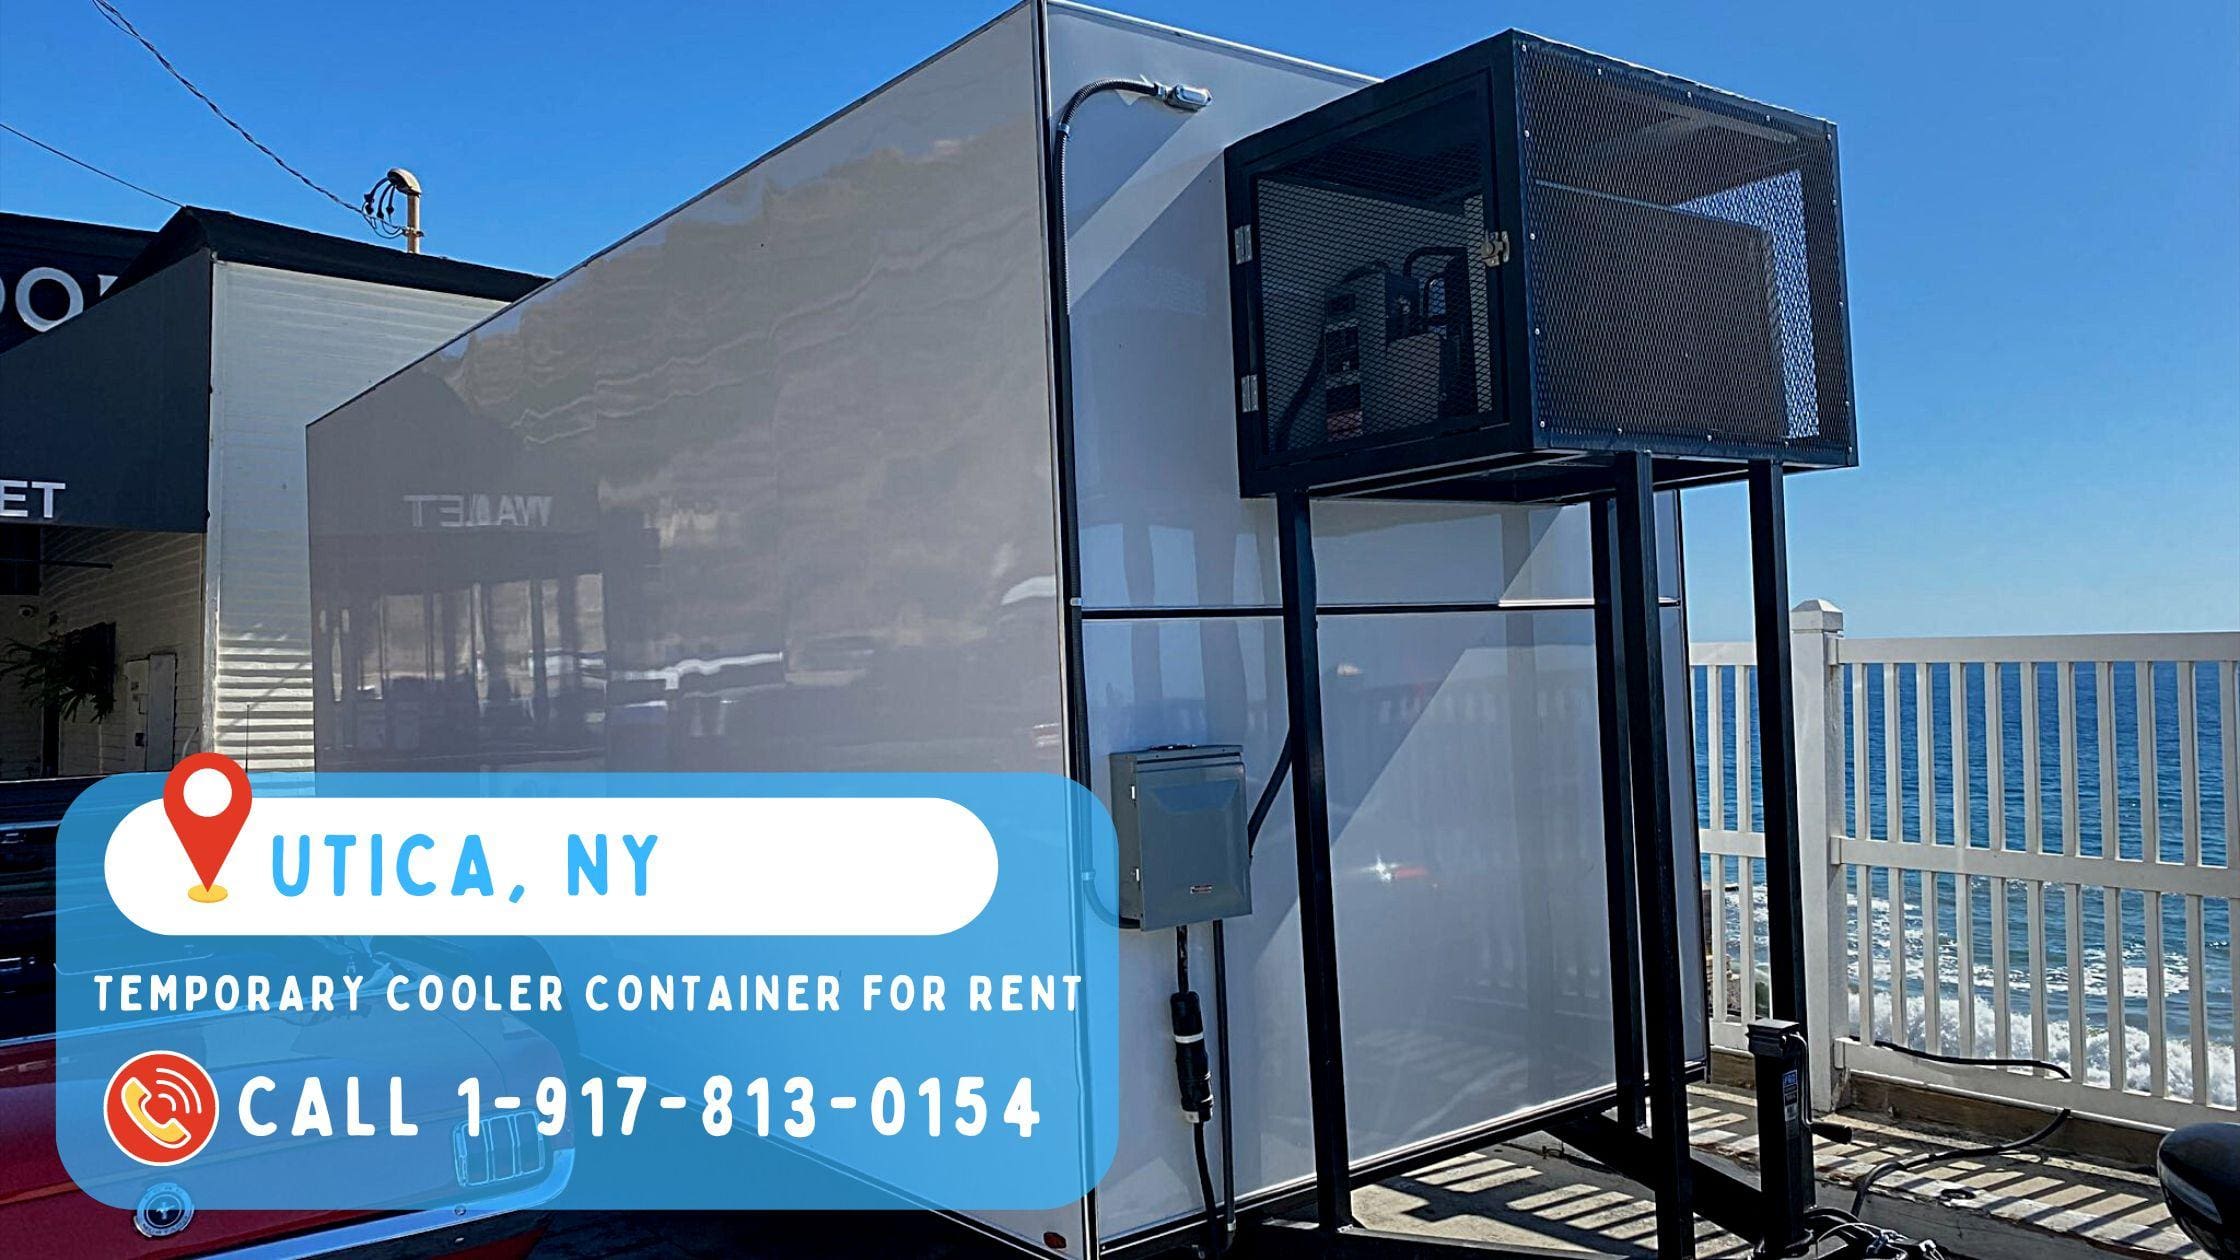 Temporary Cooler Container for Rent in Utica